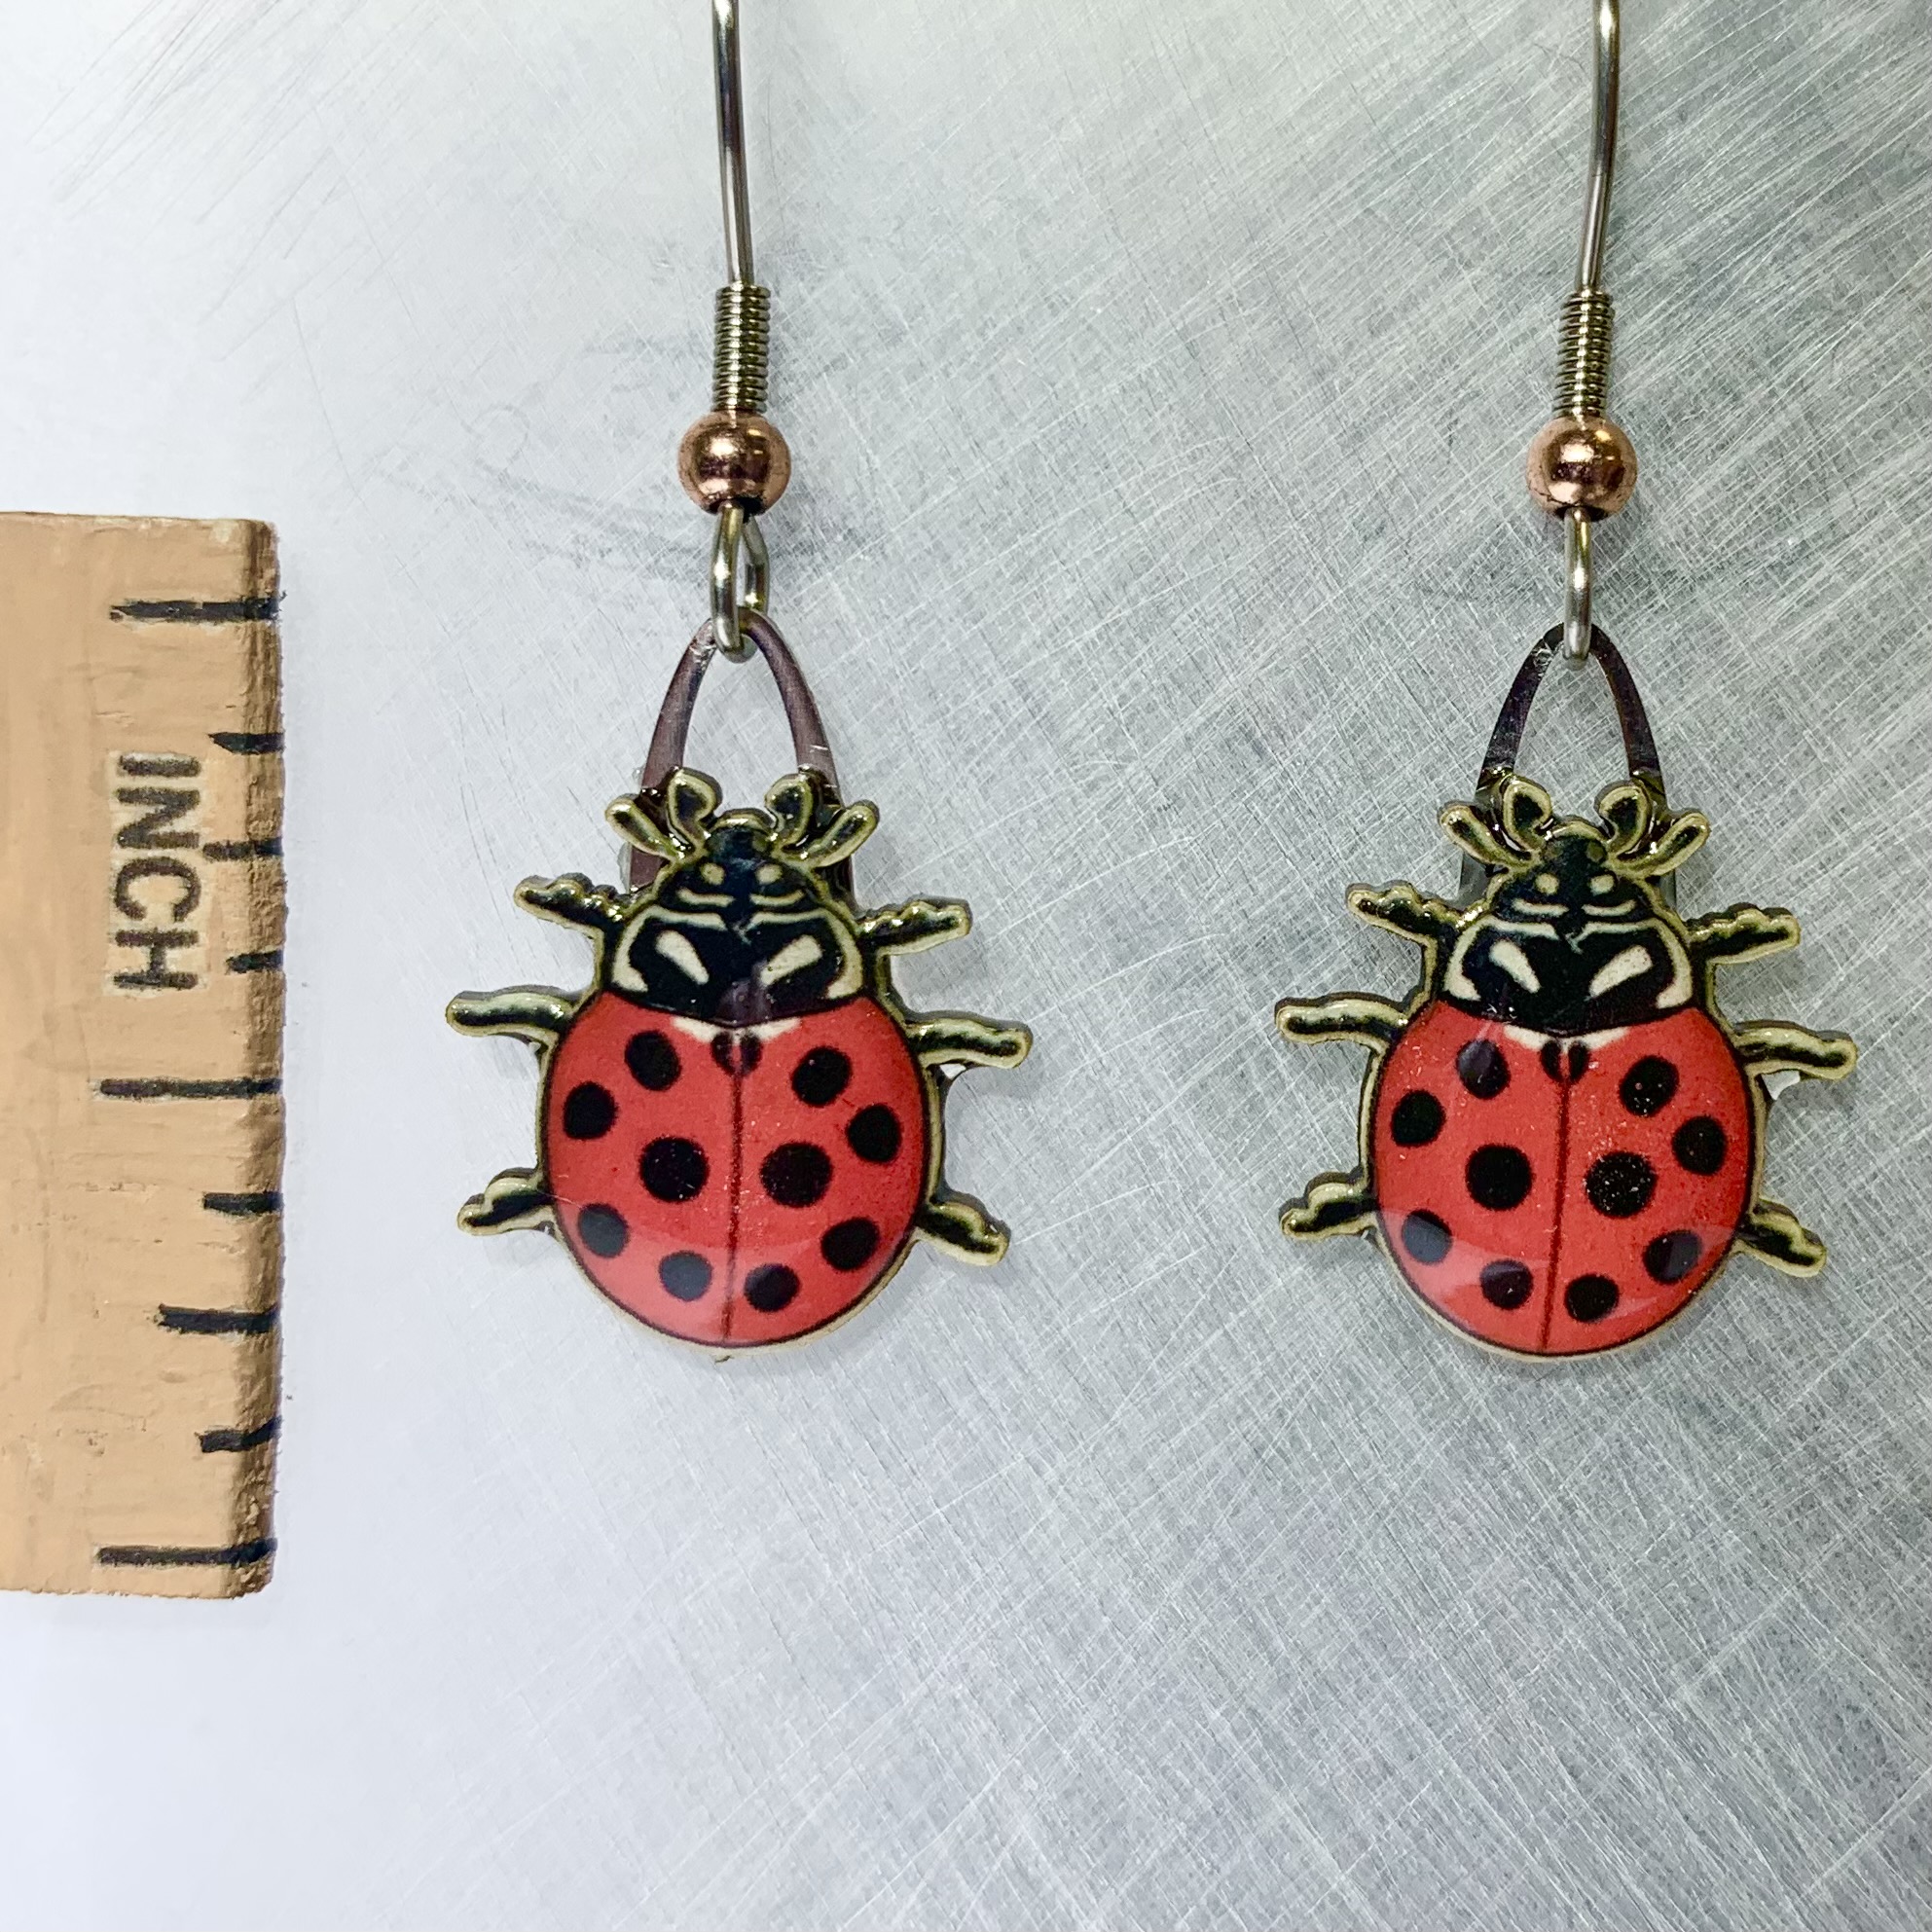 Picture shown is of 1 inch tall pair of earrings of the bug the Ladybug.